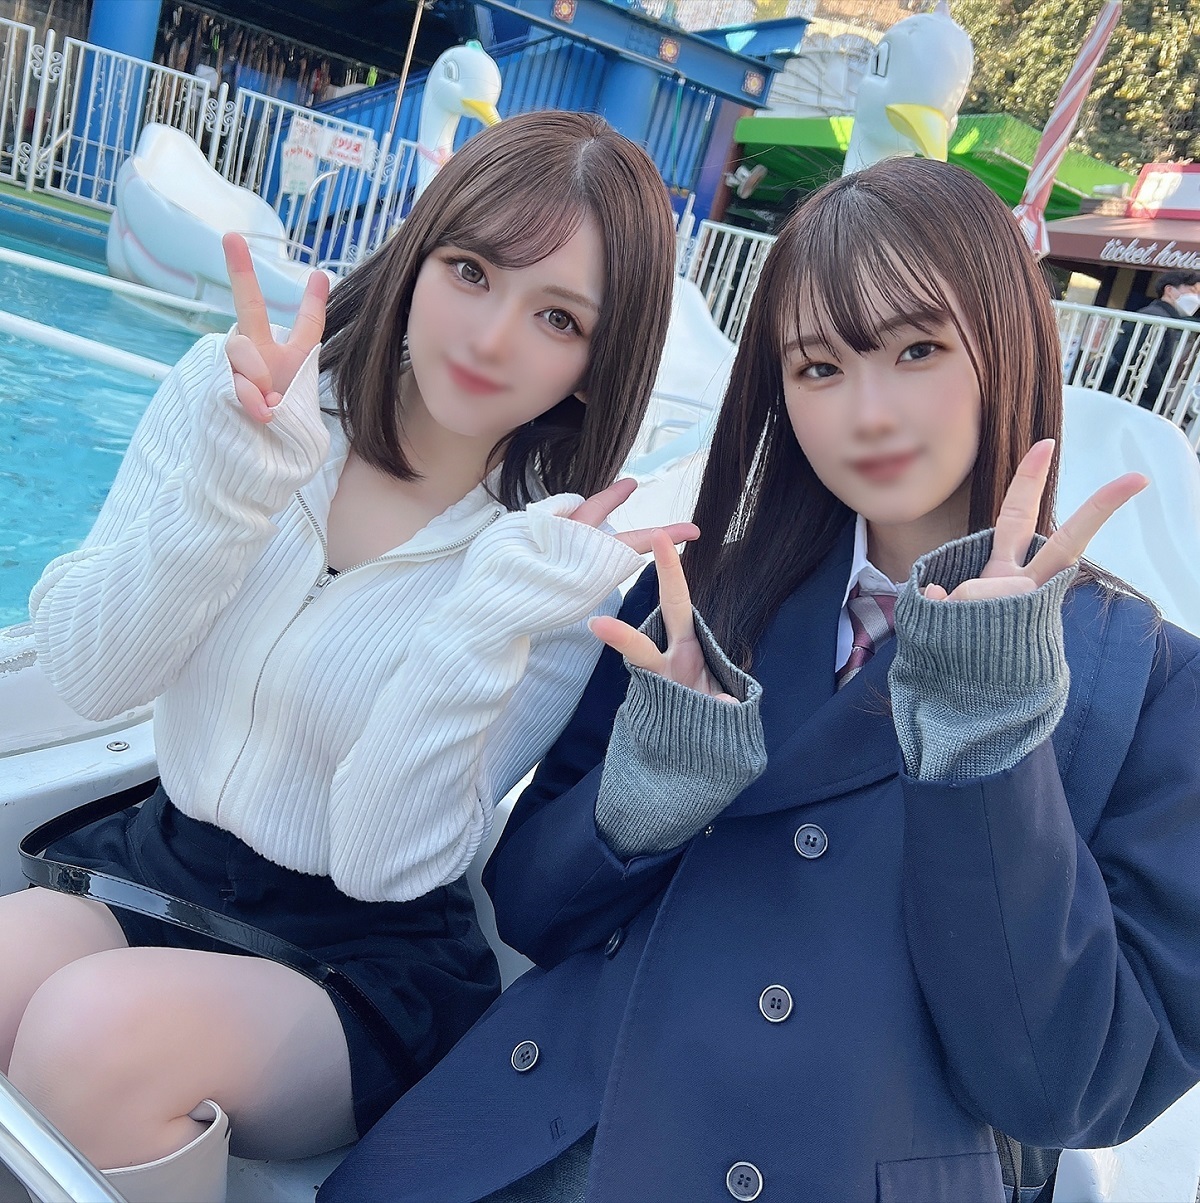 [FC2PPV.net / FC2.com] Gcup beautiful big breasts who want to be a female announcer ◯ A female college student and an idol gemstone beauty found in the Southern Alps ◯ A woman... The pleasure of holding these two at the same time was just like a dream [FC